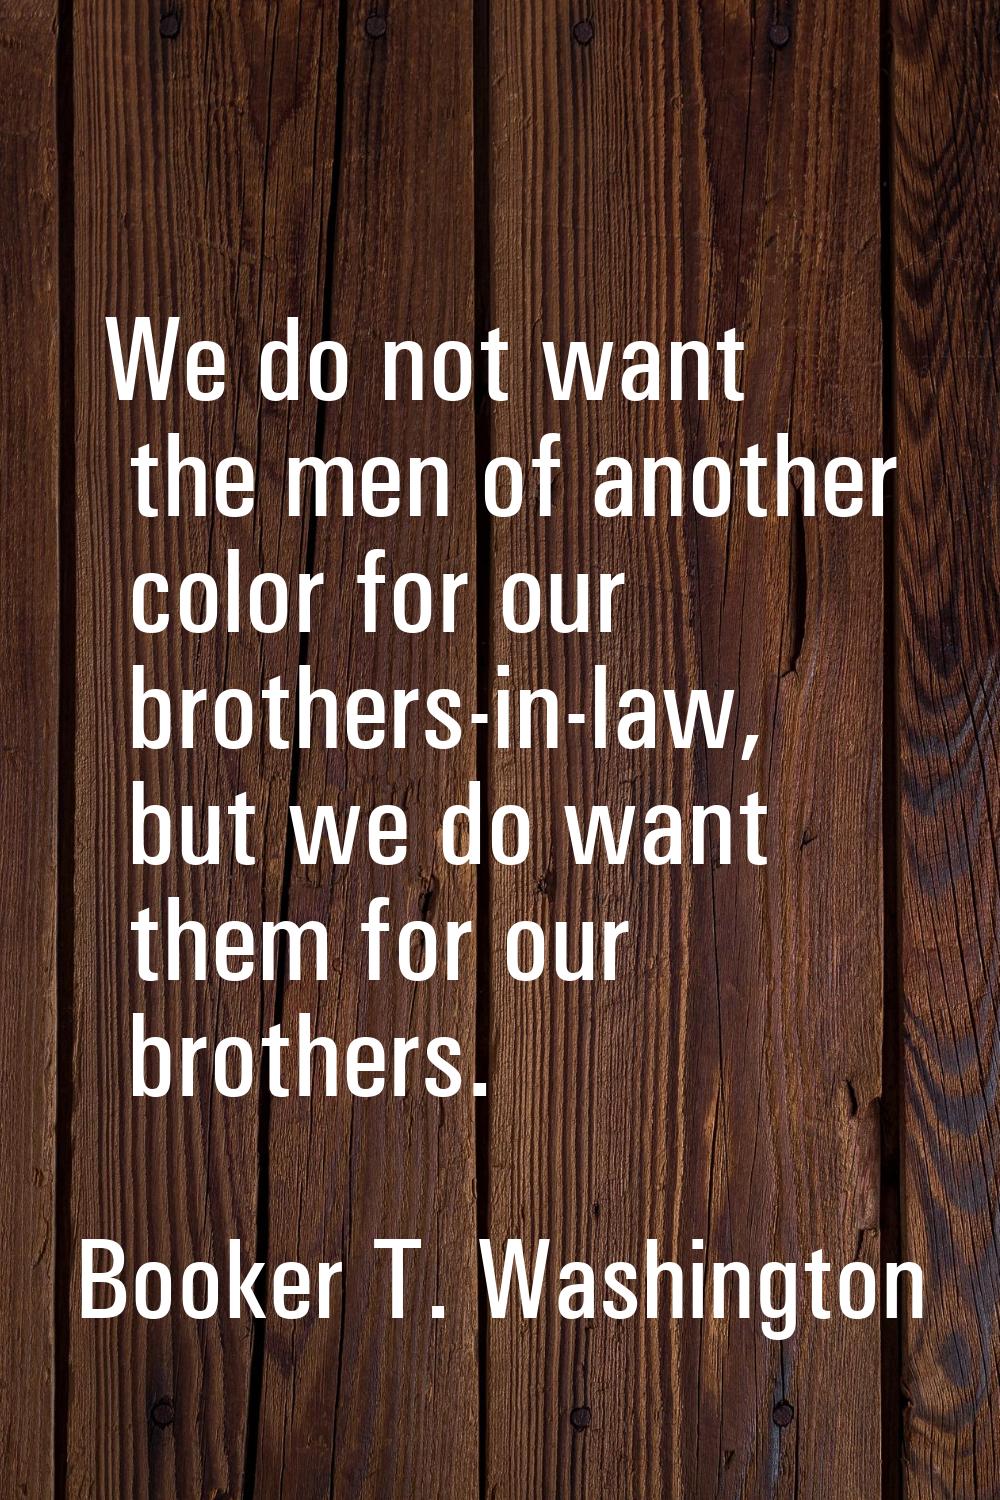 We do not want the men of another color for our brothers-in-law, but we do want them for our brothe